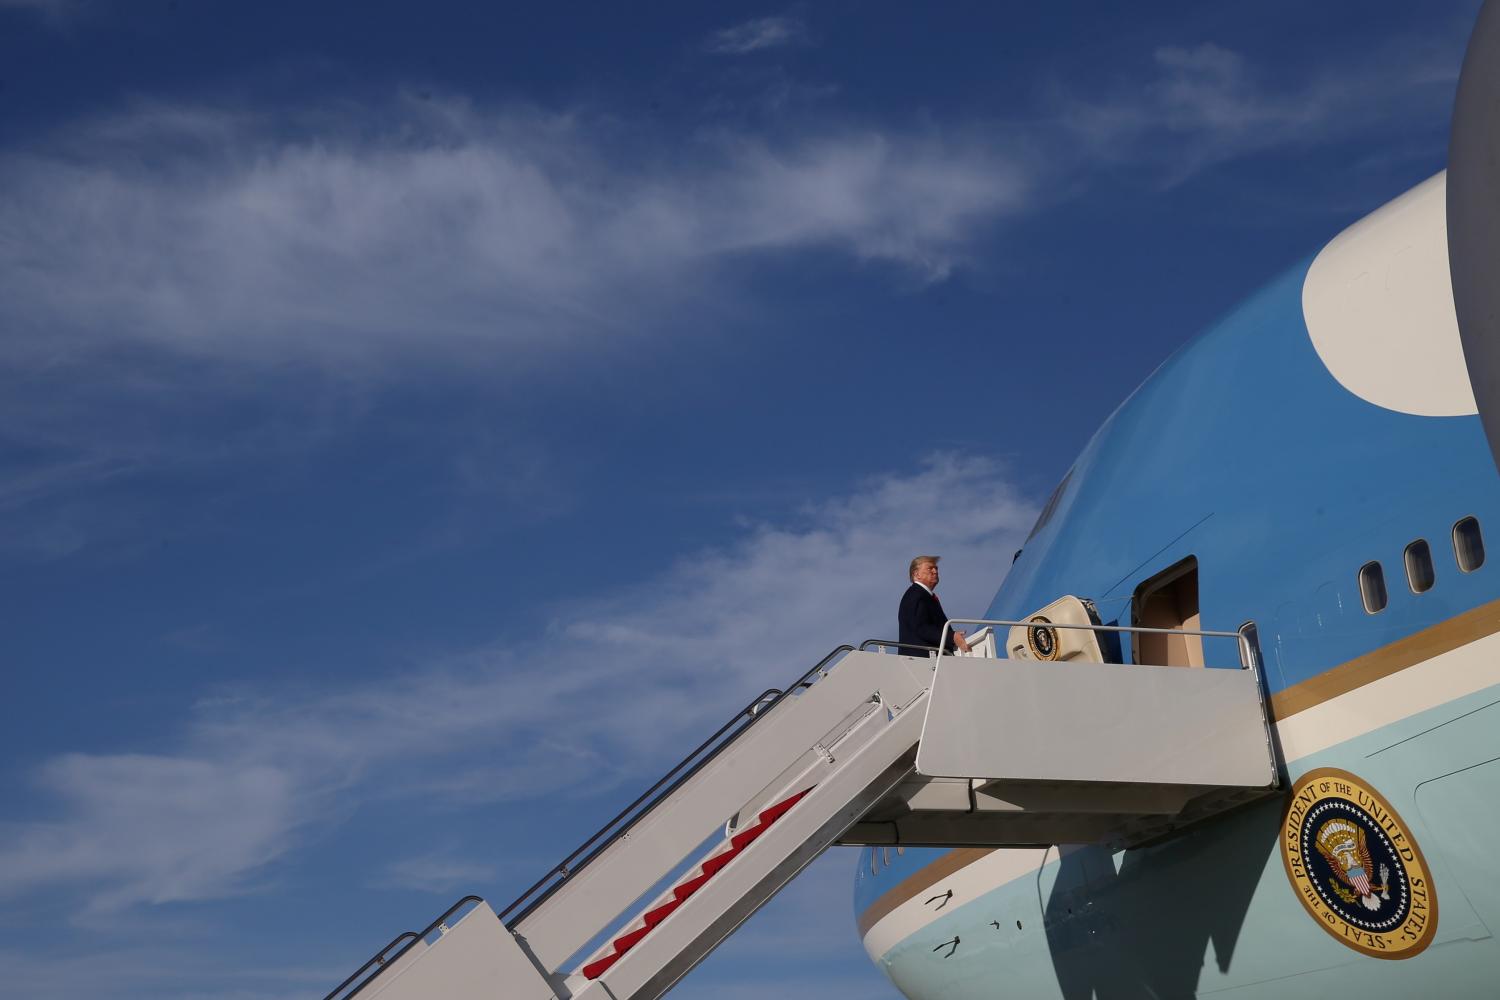 U.S. President Donald Trump boards Air Force One as he departs Washington for travel to Minnesota from Joint Base Andrews in Maryland, U.S., October 10, 2019.  REUTERS/Leah Millis - RC16E7006B70